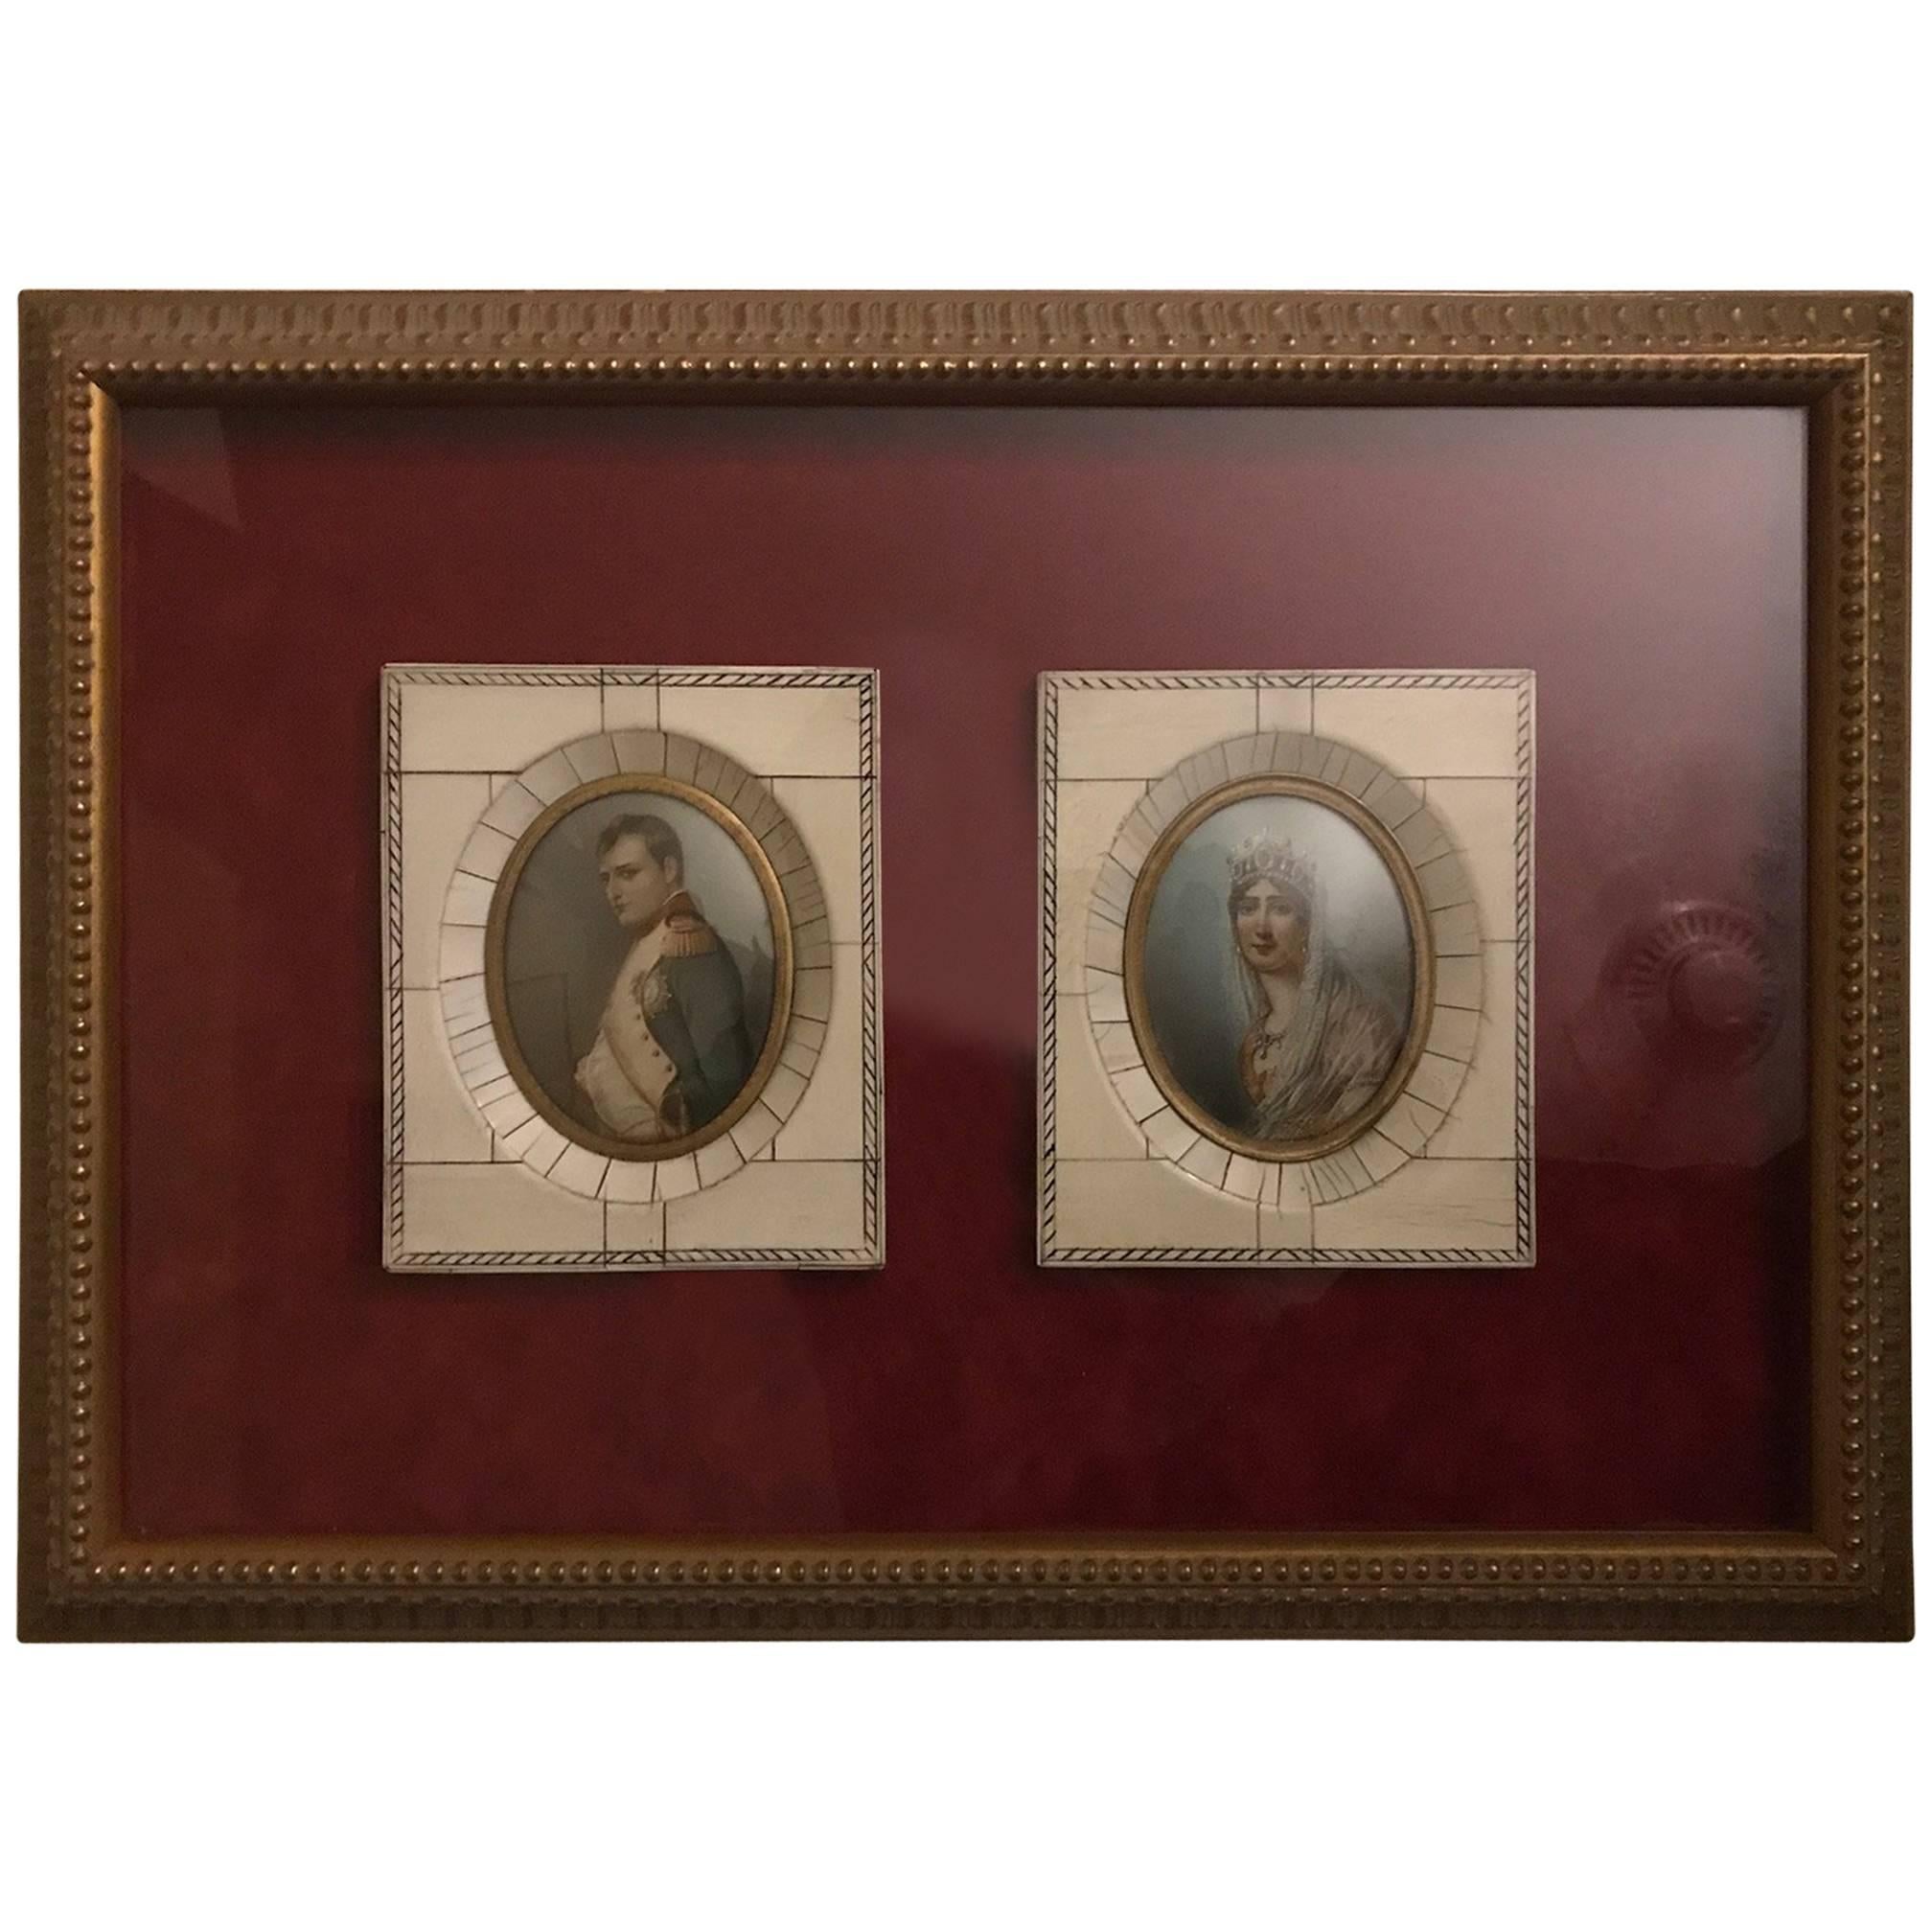 Museum Framed Pair of Miniature Portraits of Napoleon and Josephine, 1840s